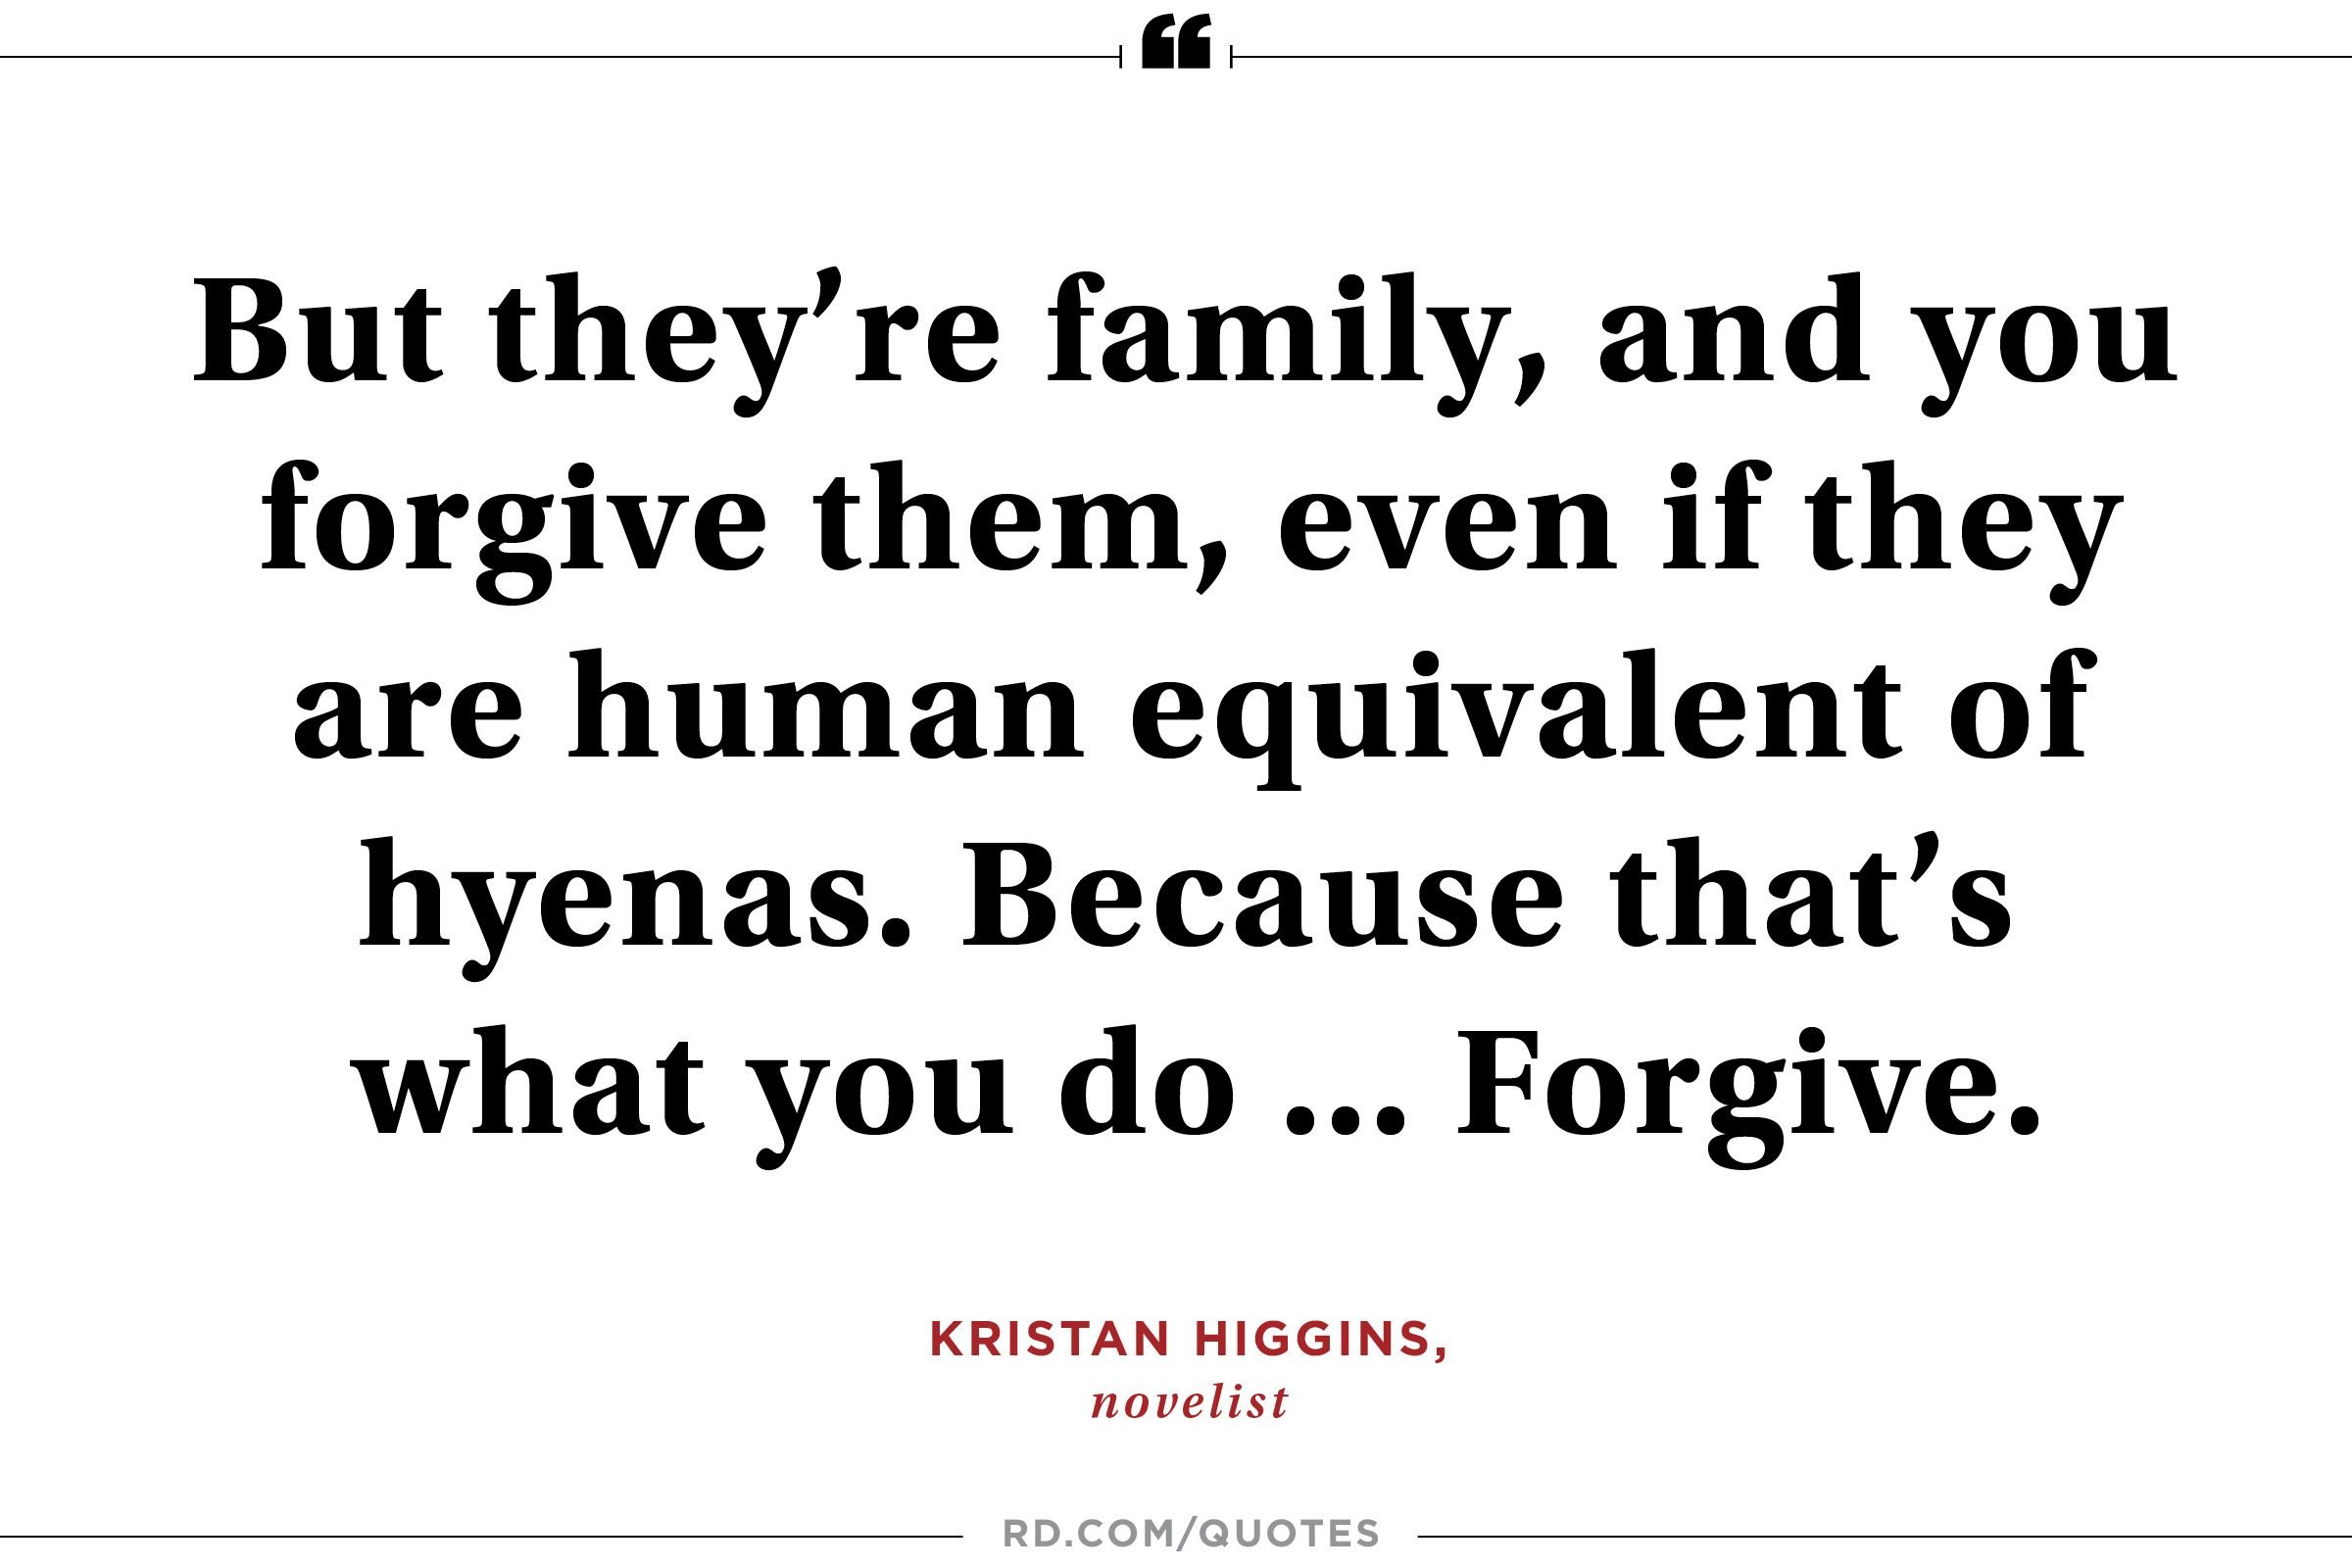 forgiveness in families